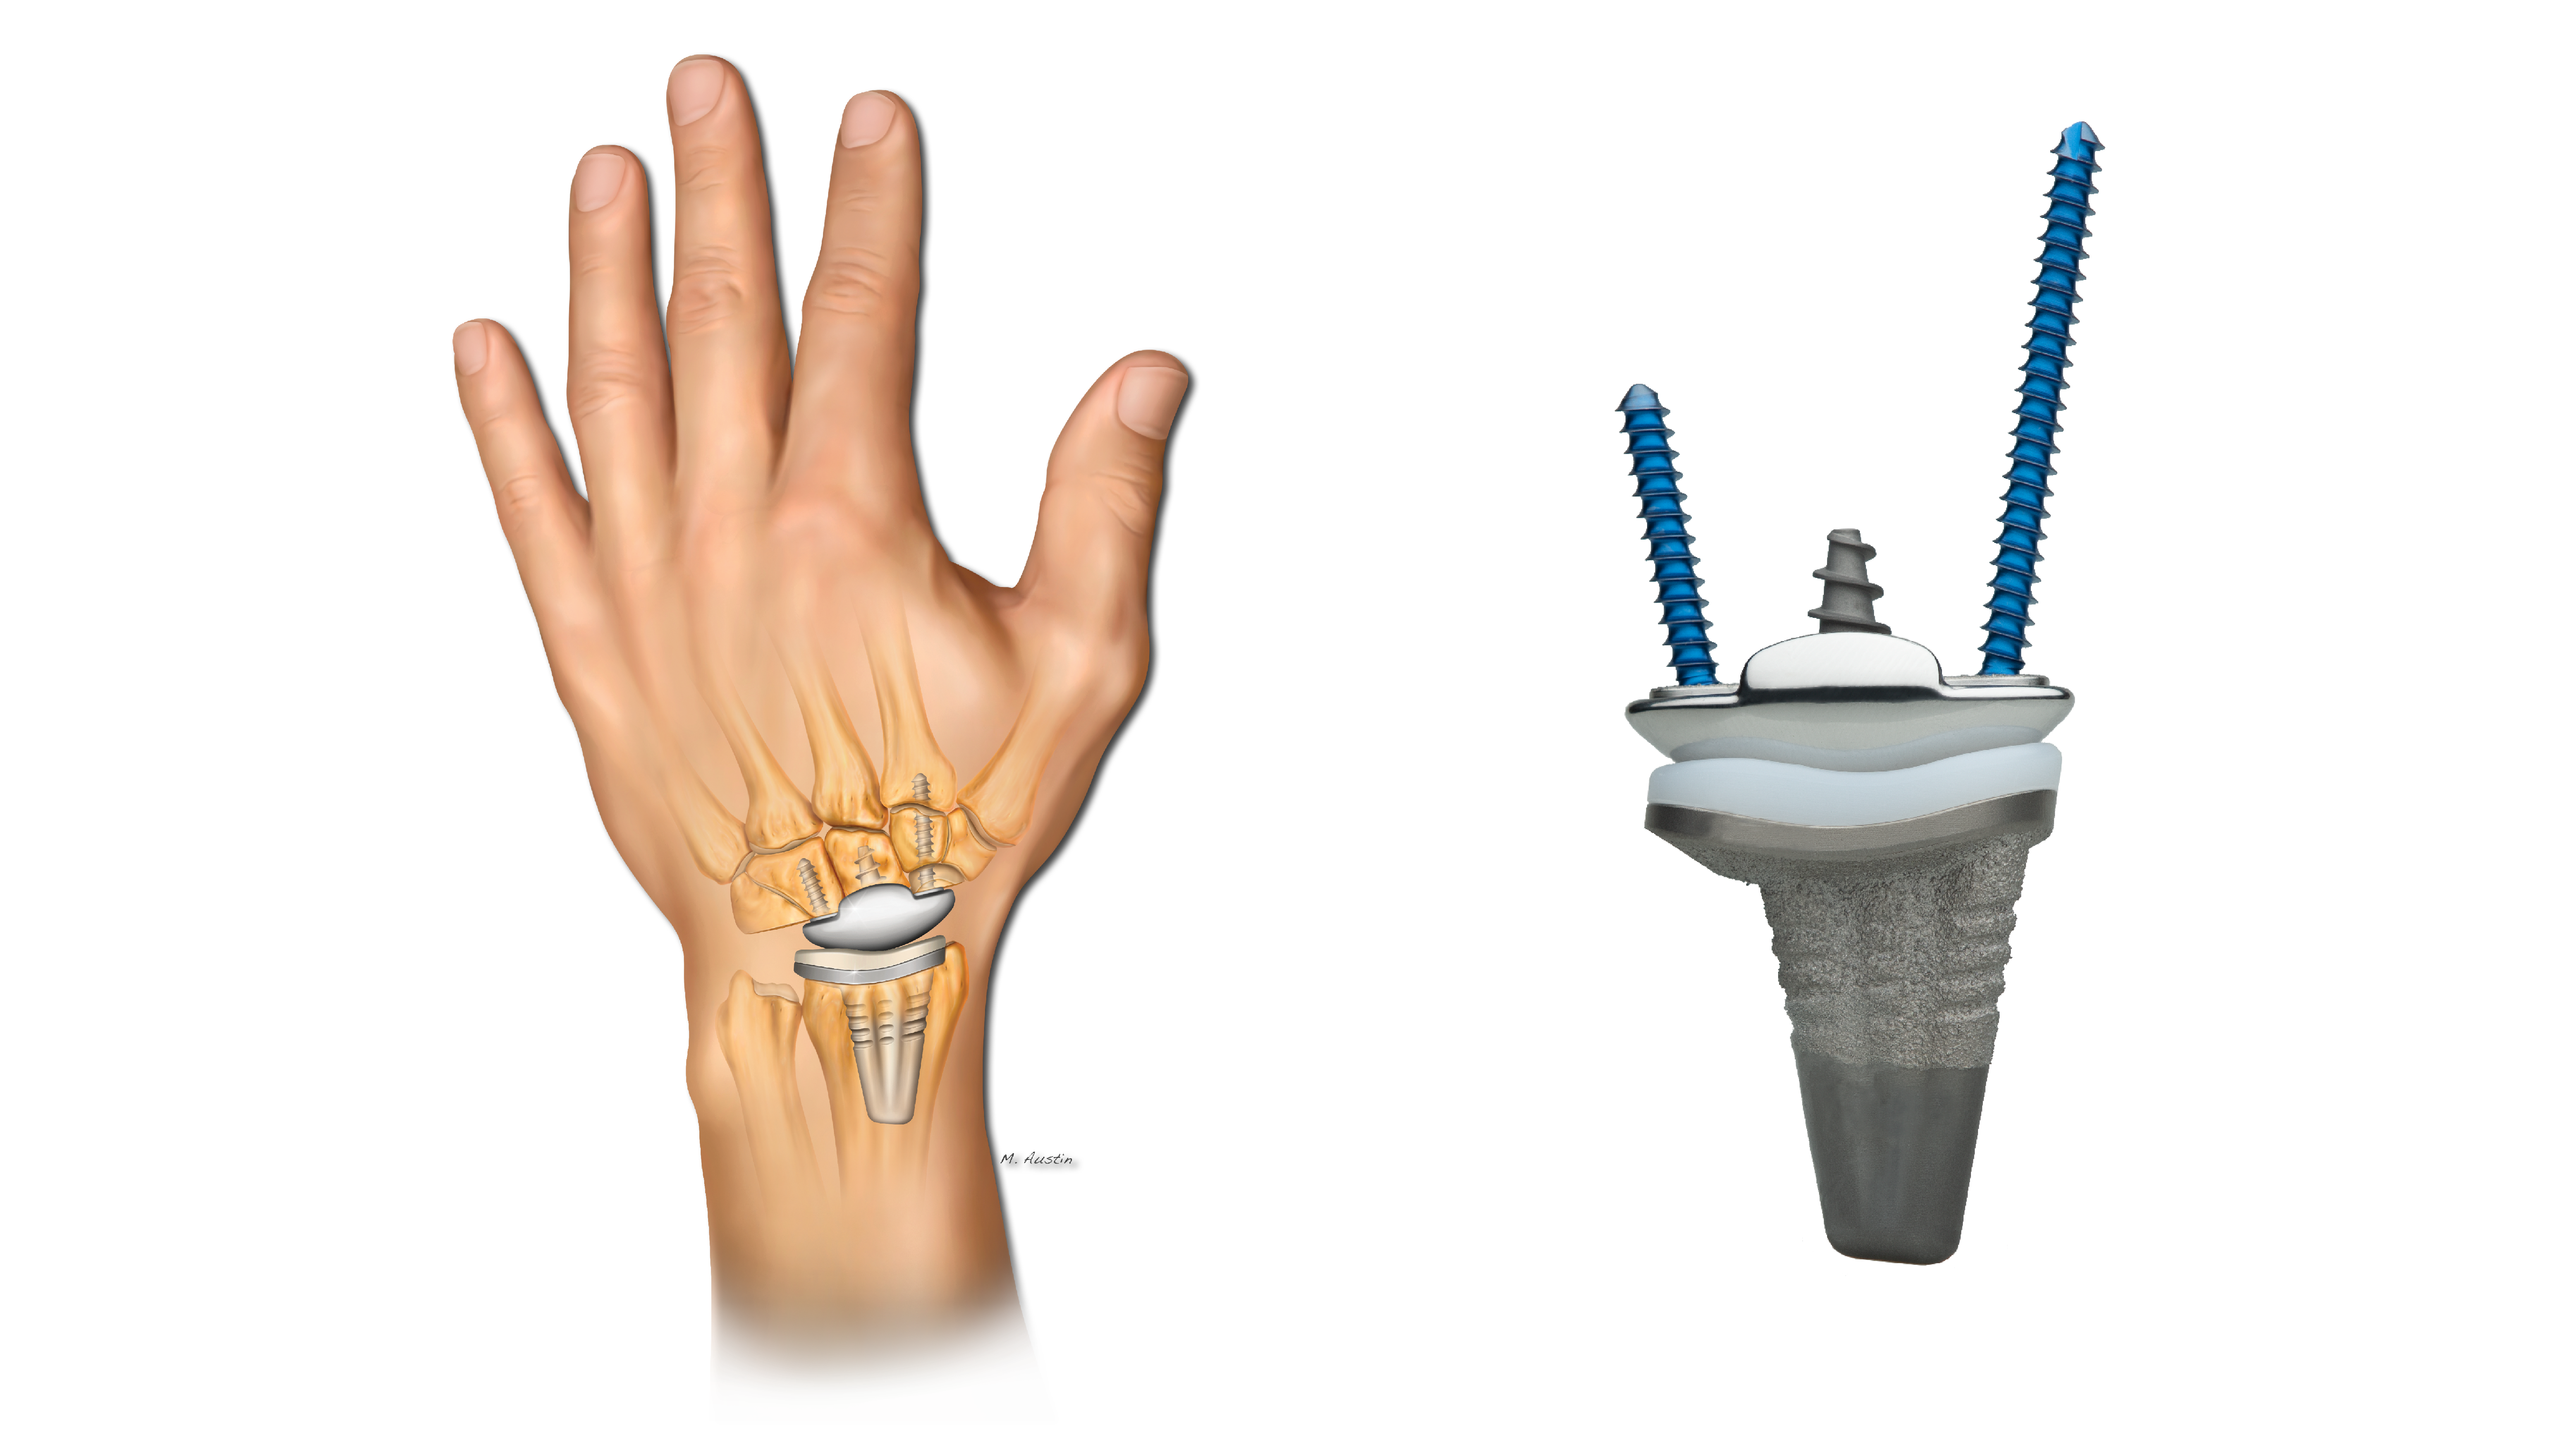 WristMotion Total Wrist Arthroplasty System illustration and implant construct